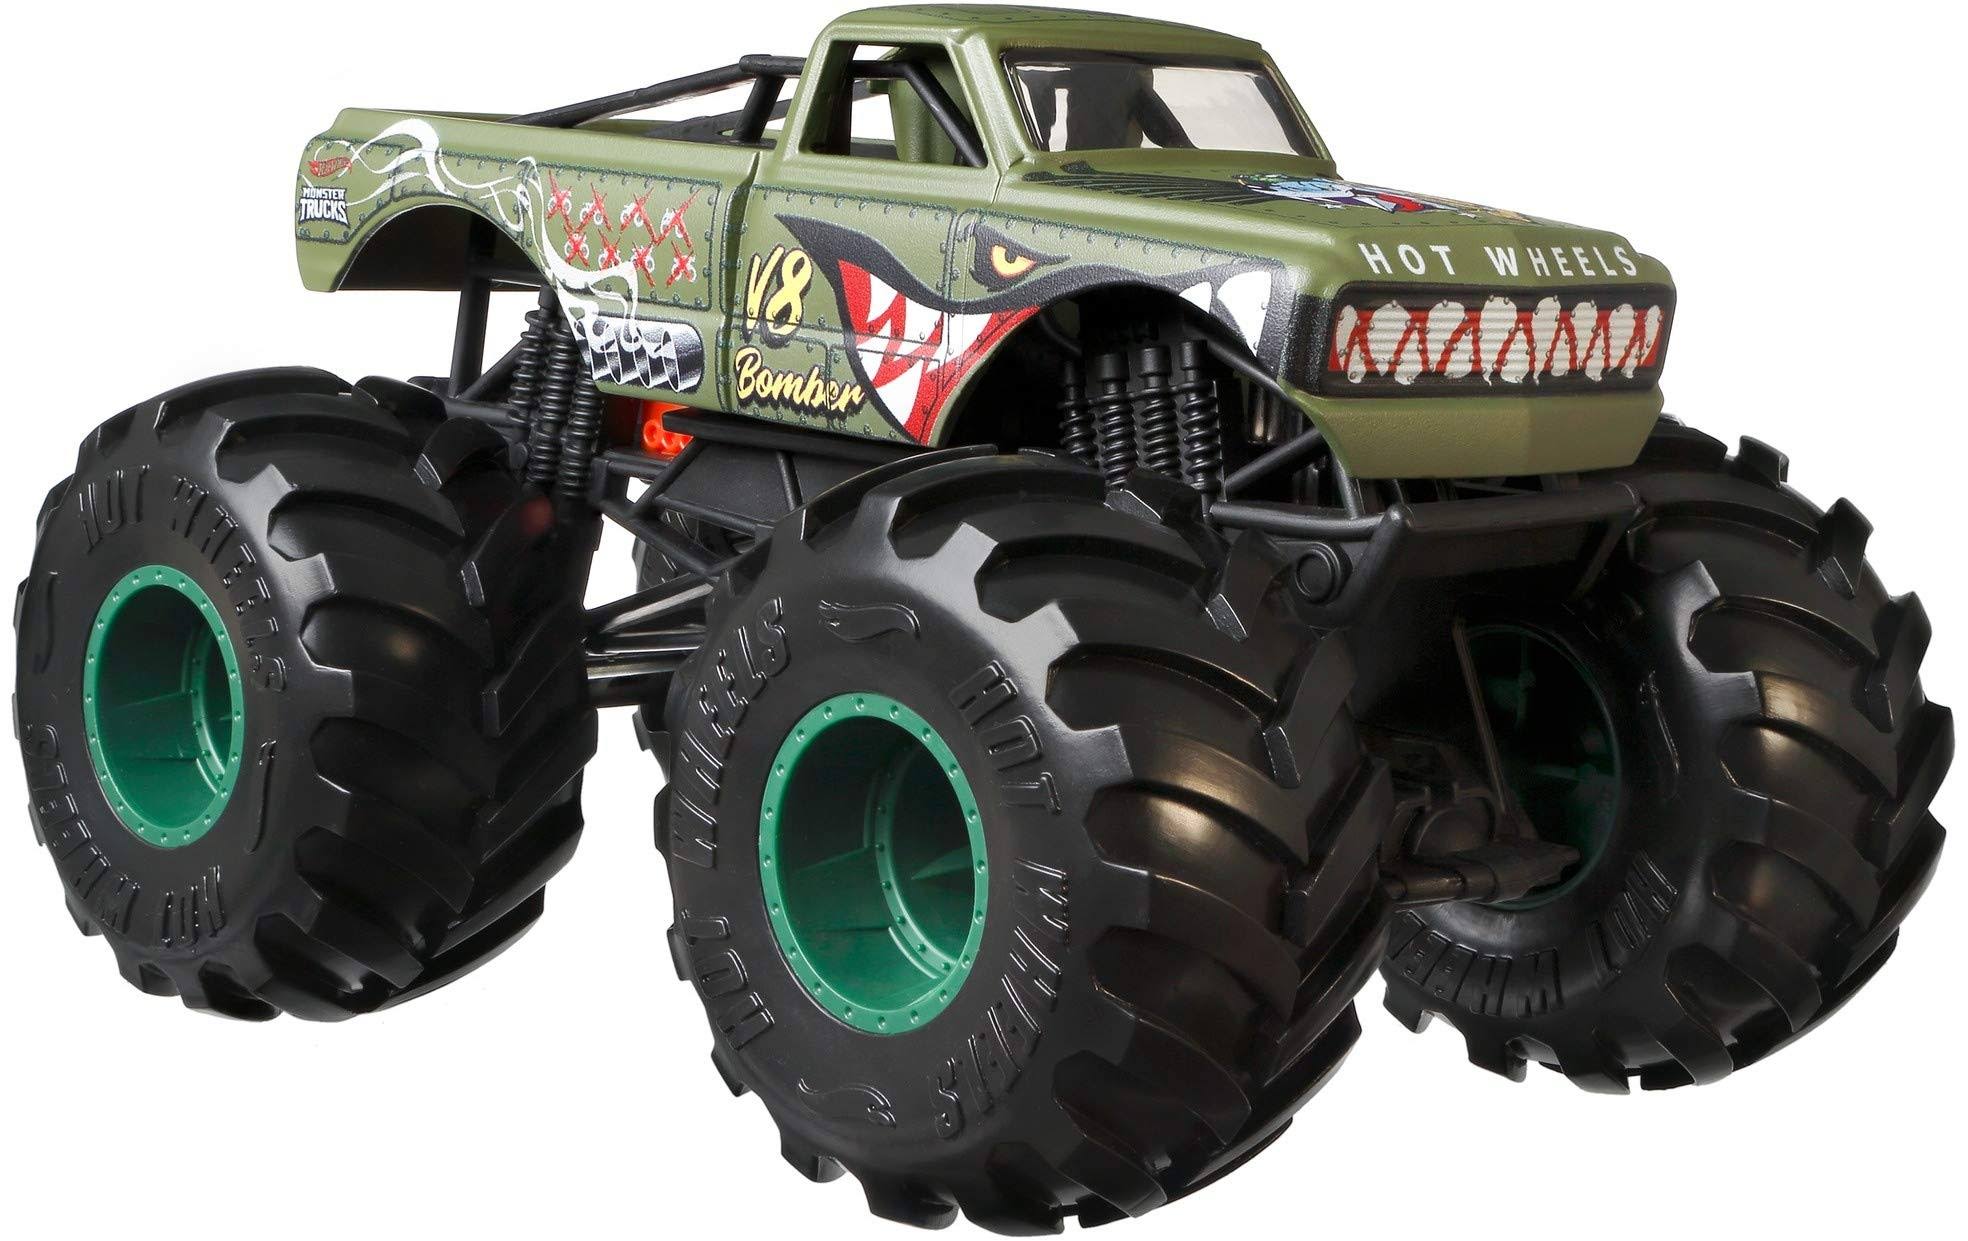 Hot Wheels Monster Trucks 1:24 Scale Bomber Vehicle for Kids Age 3 4 5 6 7 8 Years Old Great Gift Toy Trucks Large Scales